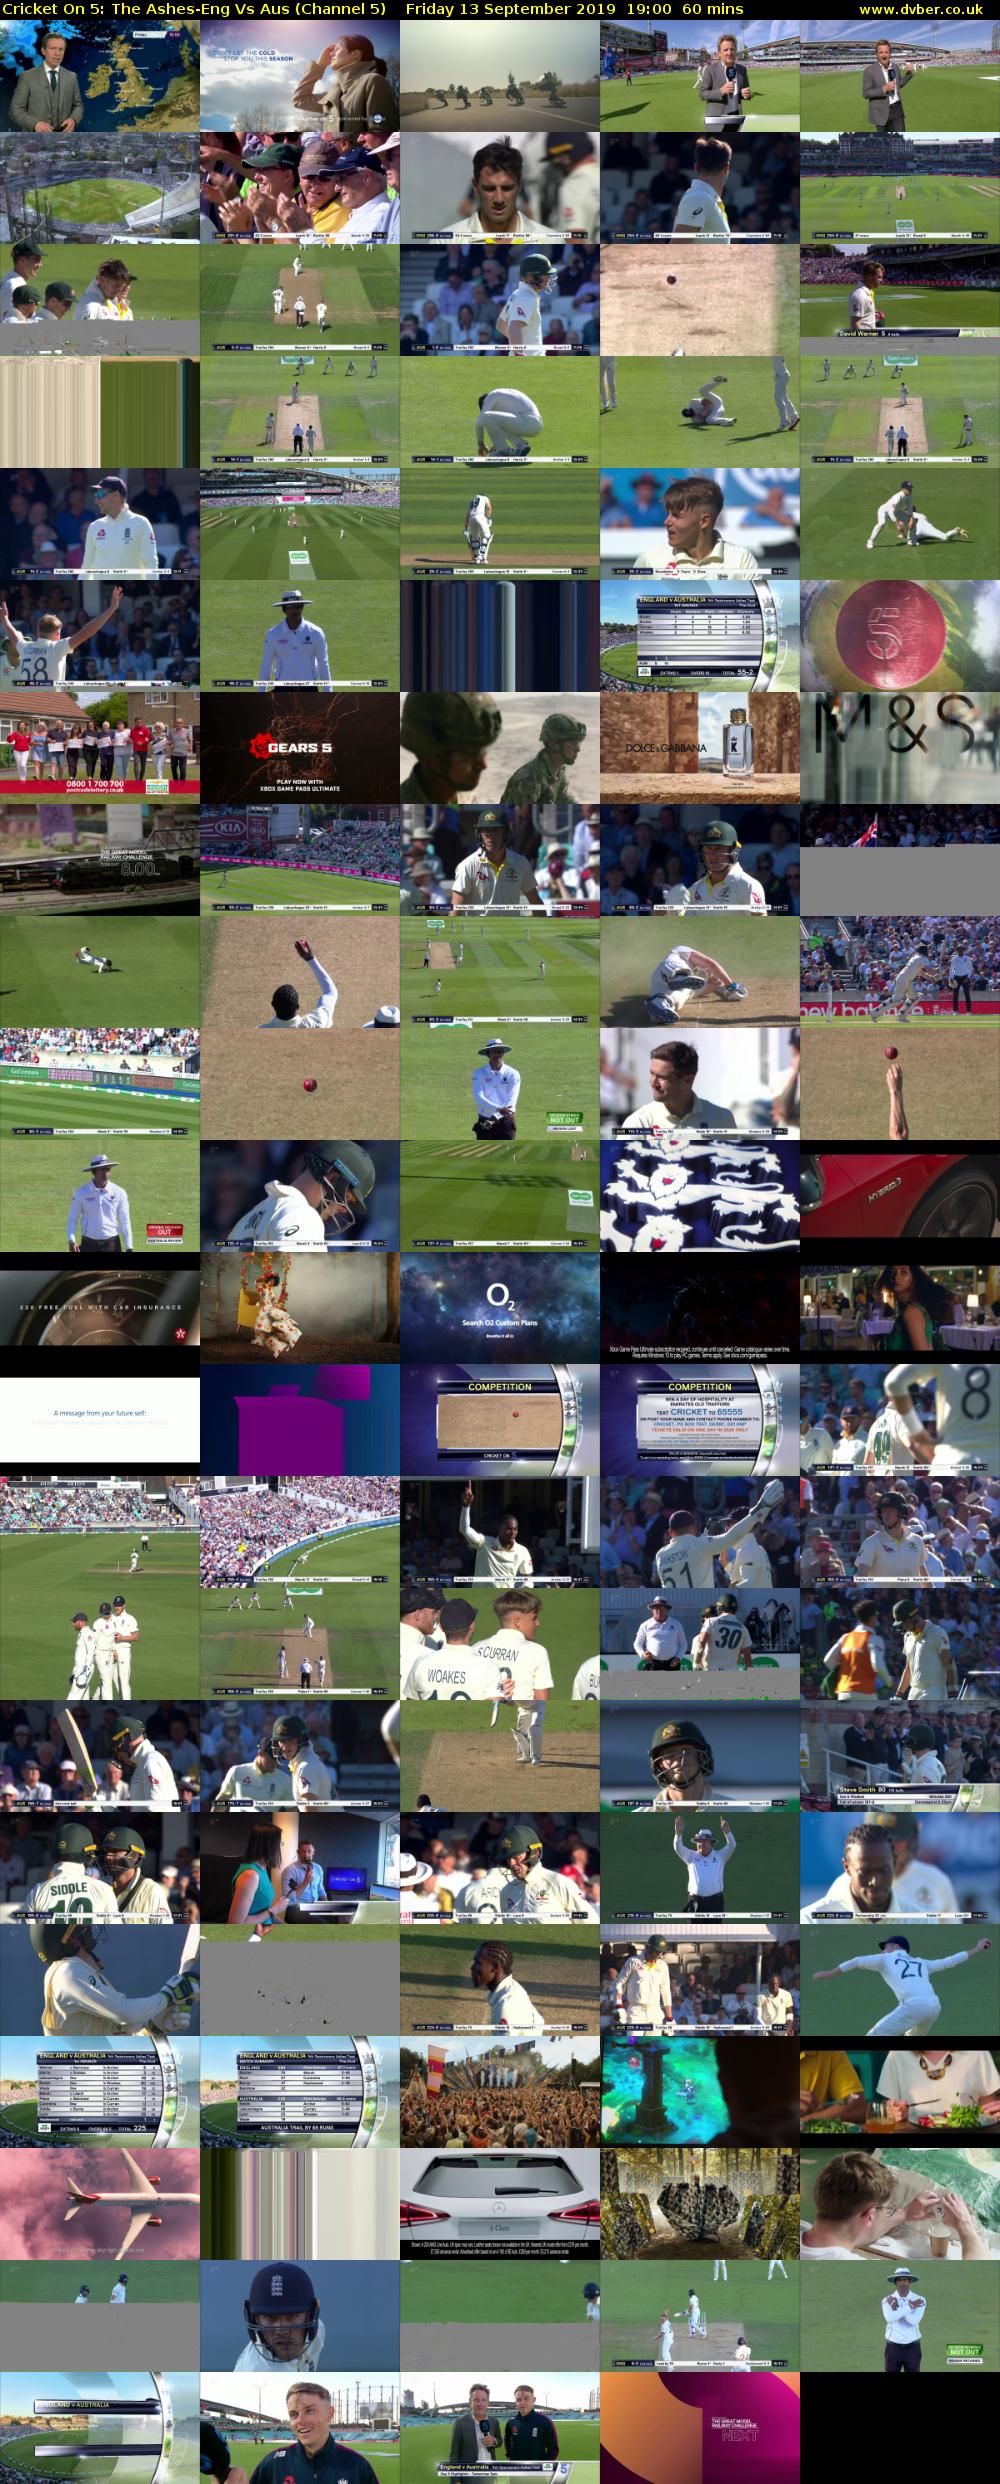 Cricket On 5: The Ashes-Eng Vs Aus (Channel 5) Friday 13 September 2019 19:00 - 20:00